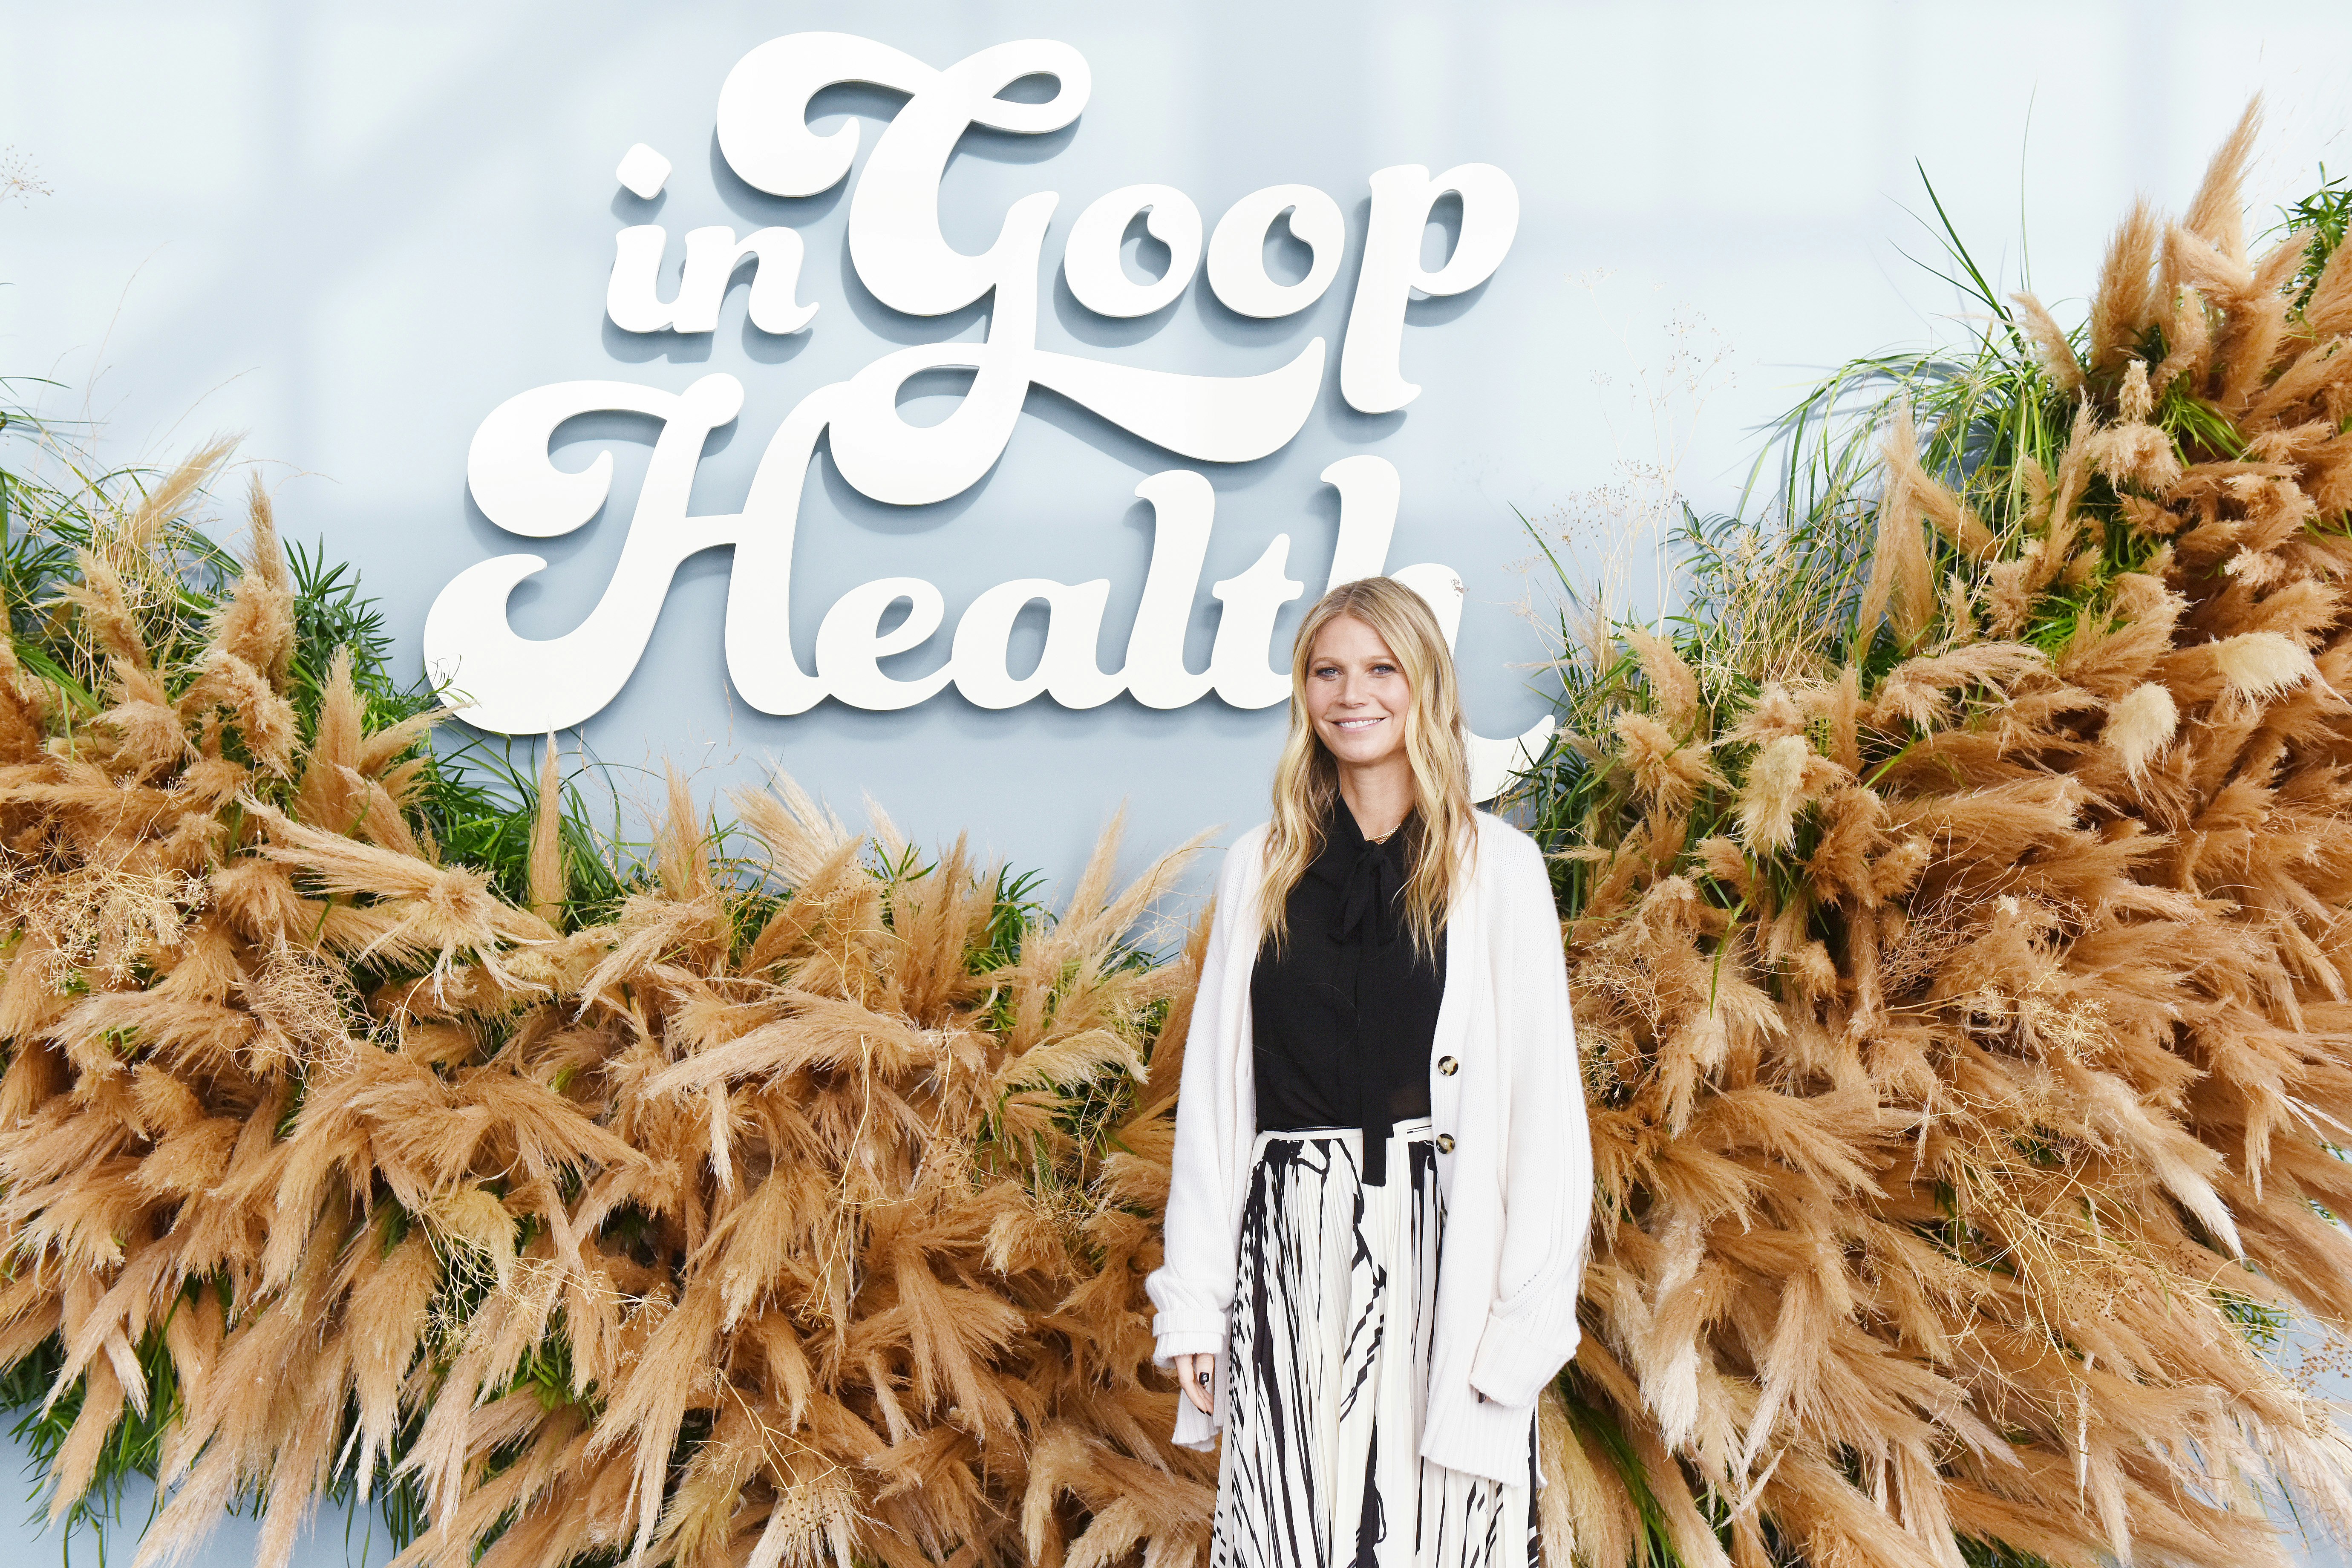 Gwyneth Paltrow at a Goop in Health event in Los Angeles